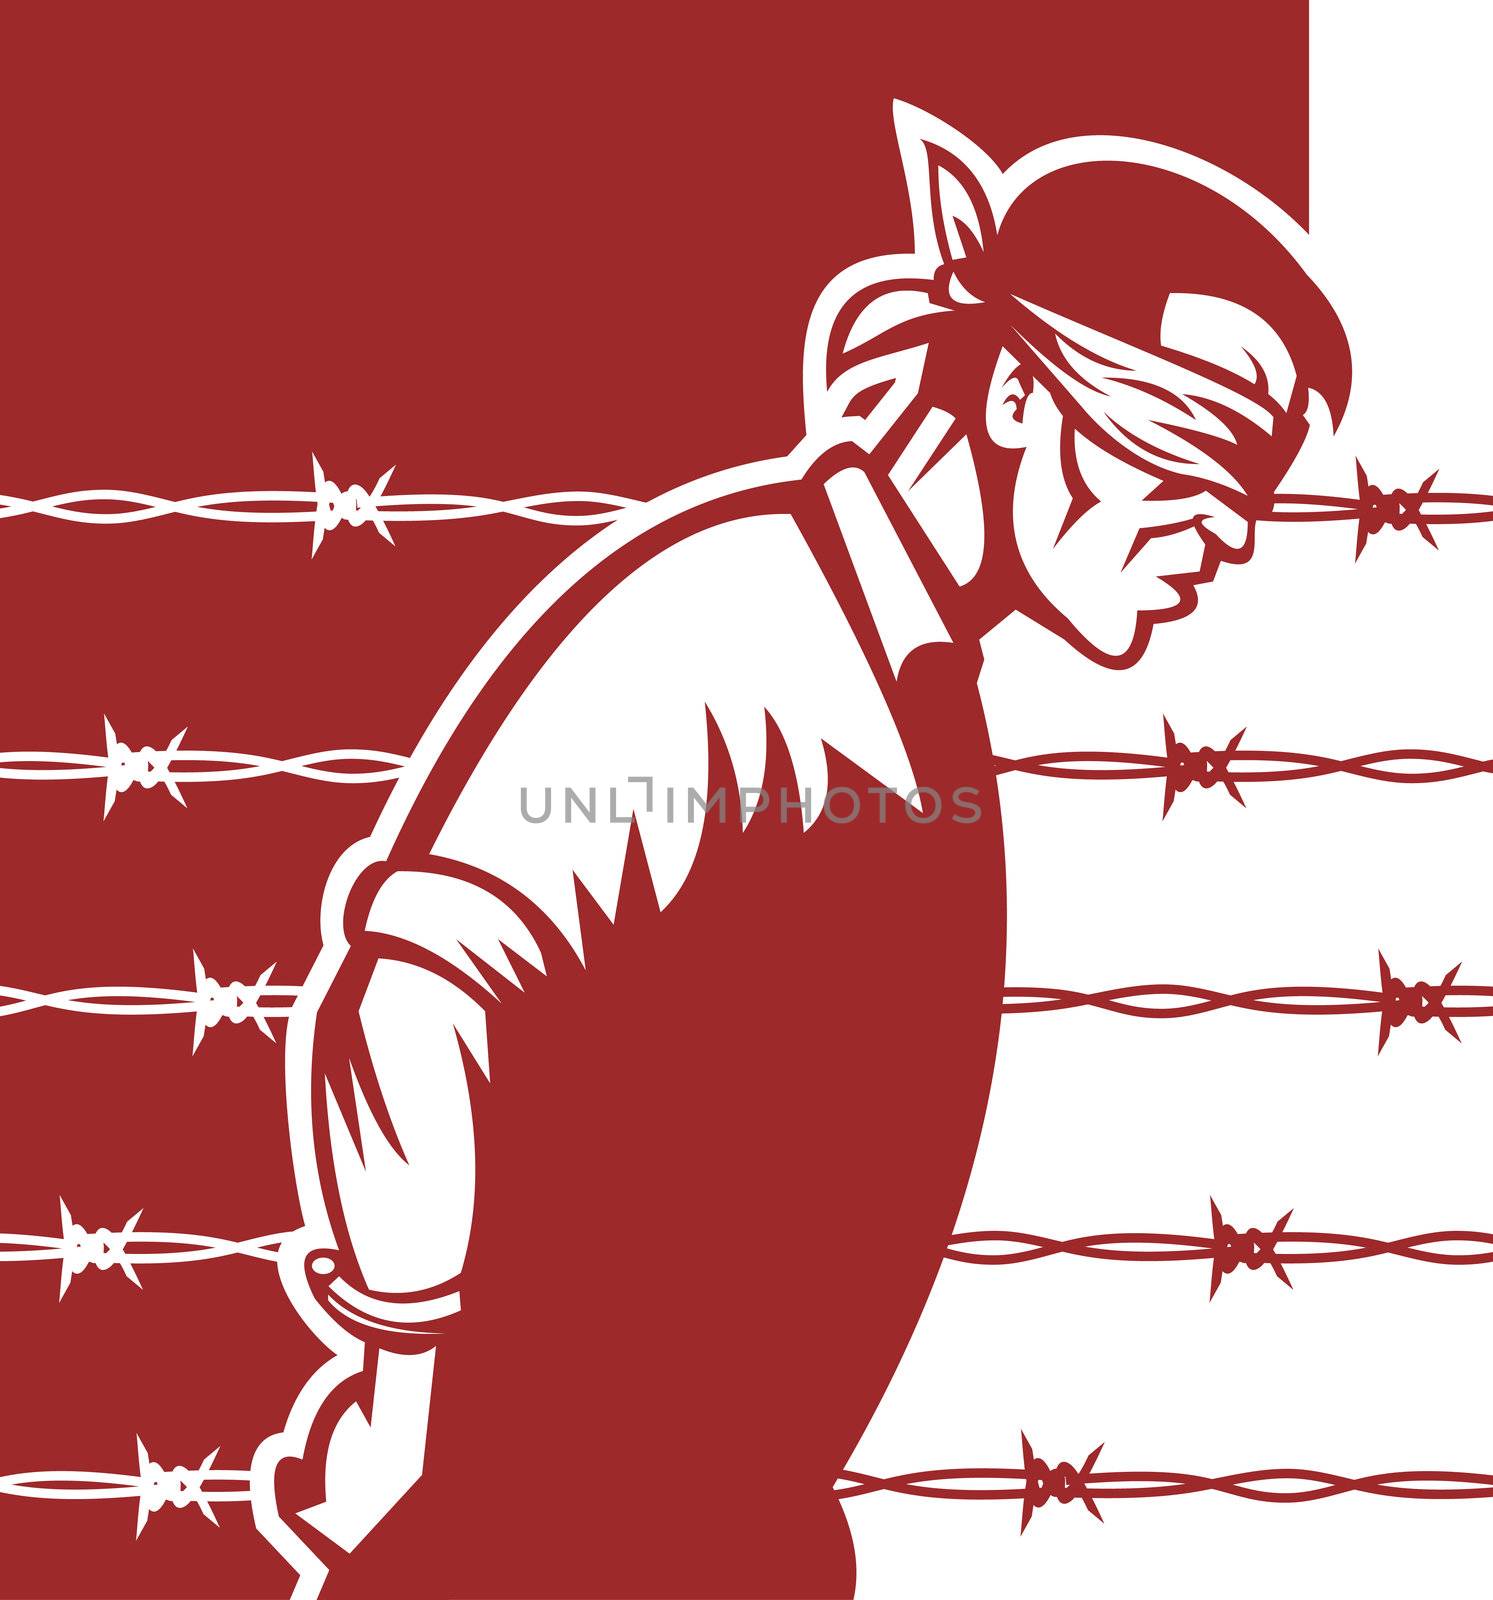 illustration of a Prisoner blindfolded and hands tied with barbed wire in background